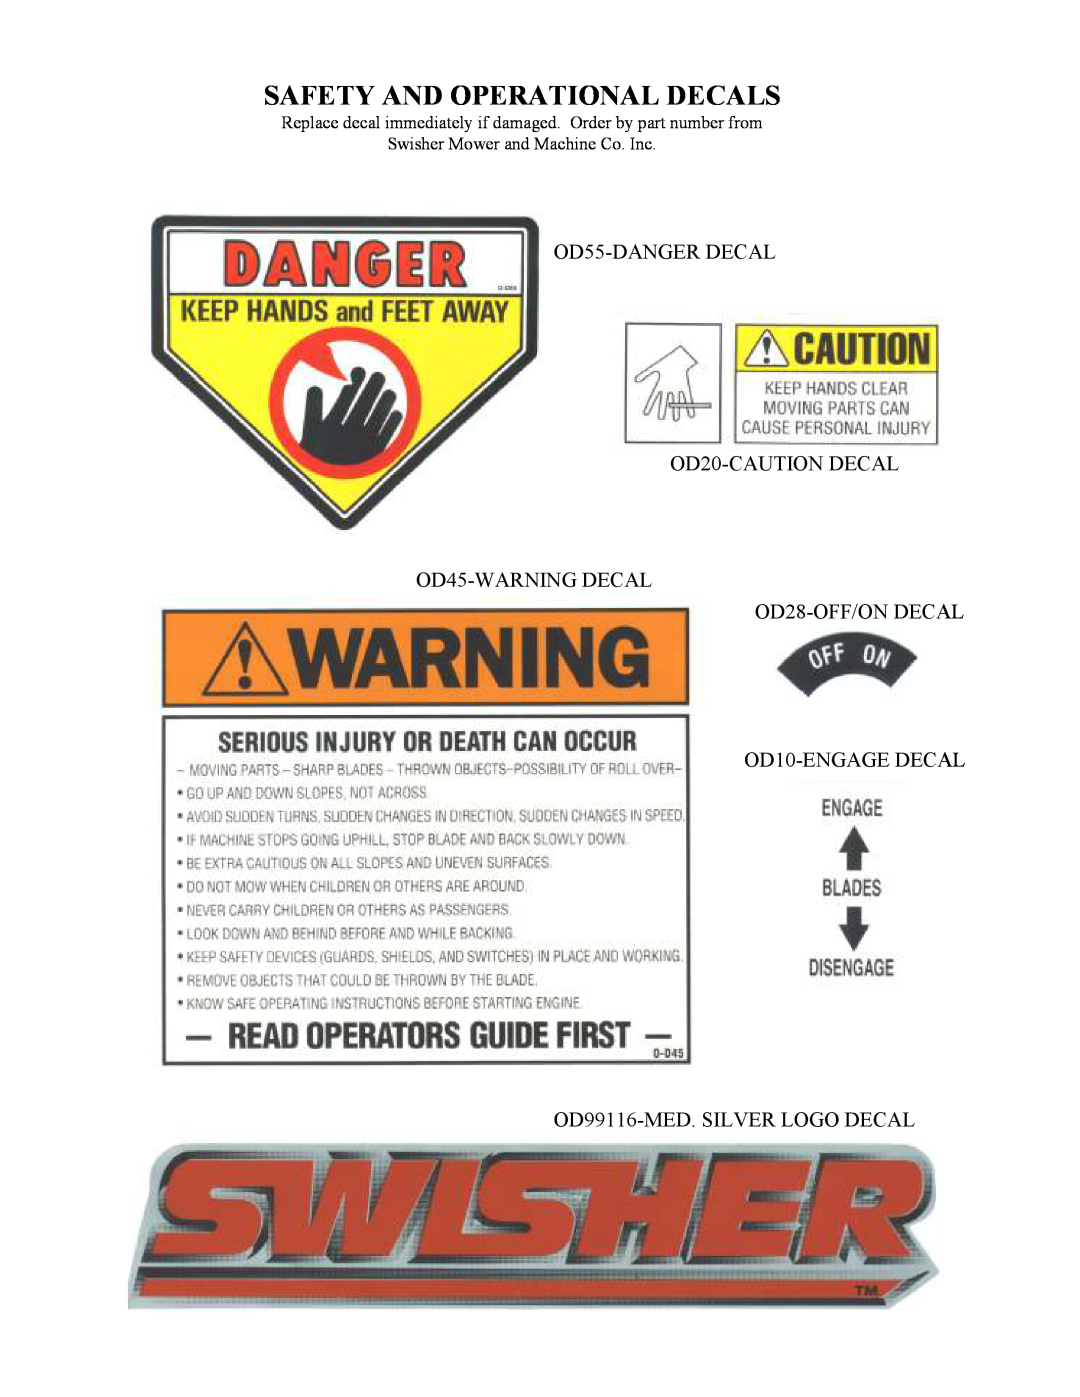 Swisher RT800441, RTB105441 Safety And Operational Decals, OD55-DANGER DECAL OD20-CAUTION DECAL OD45-WARNING DECAL 